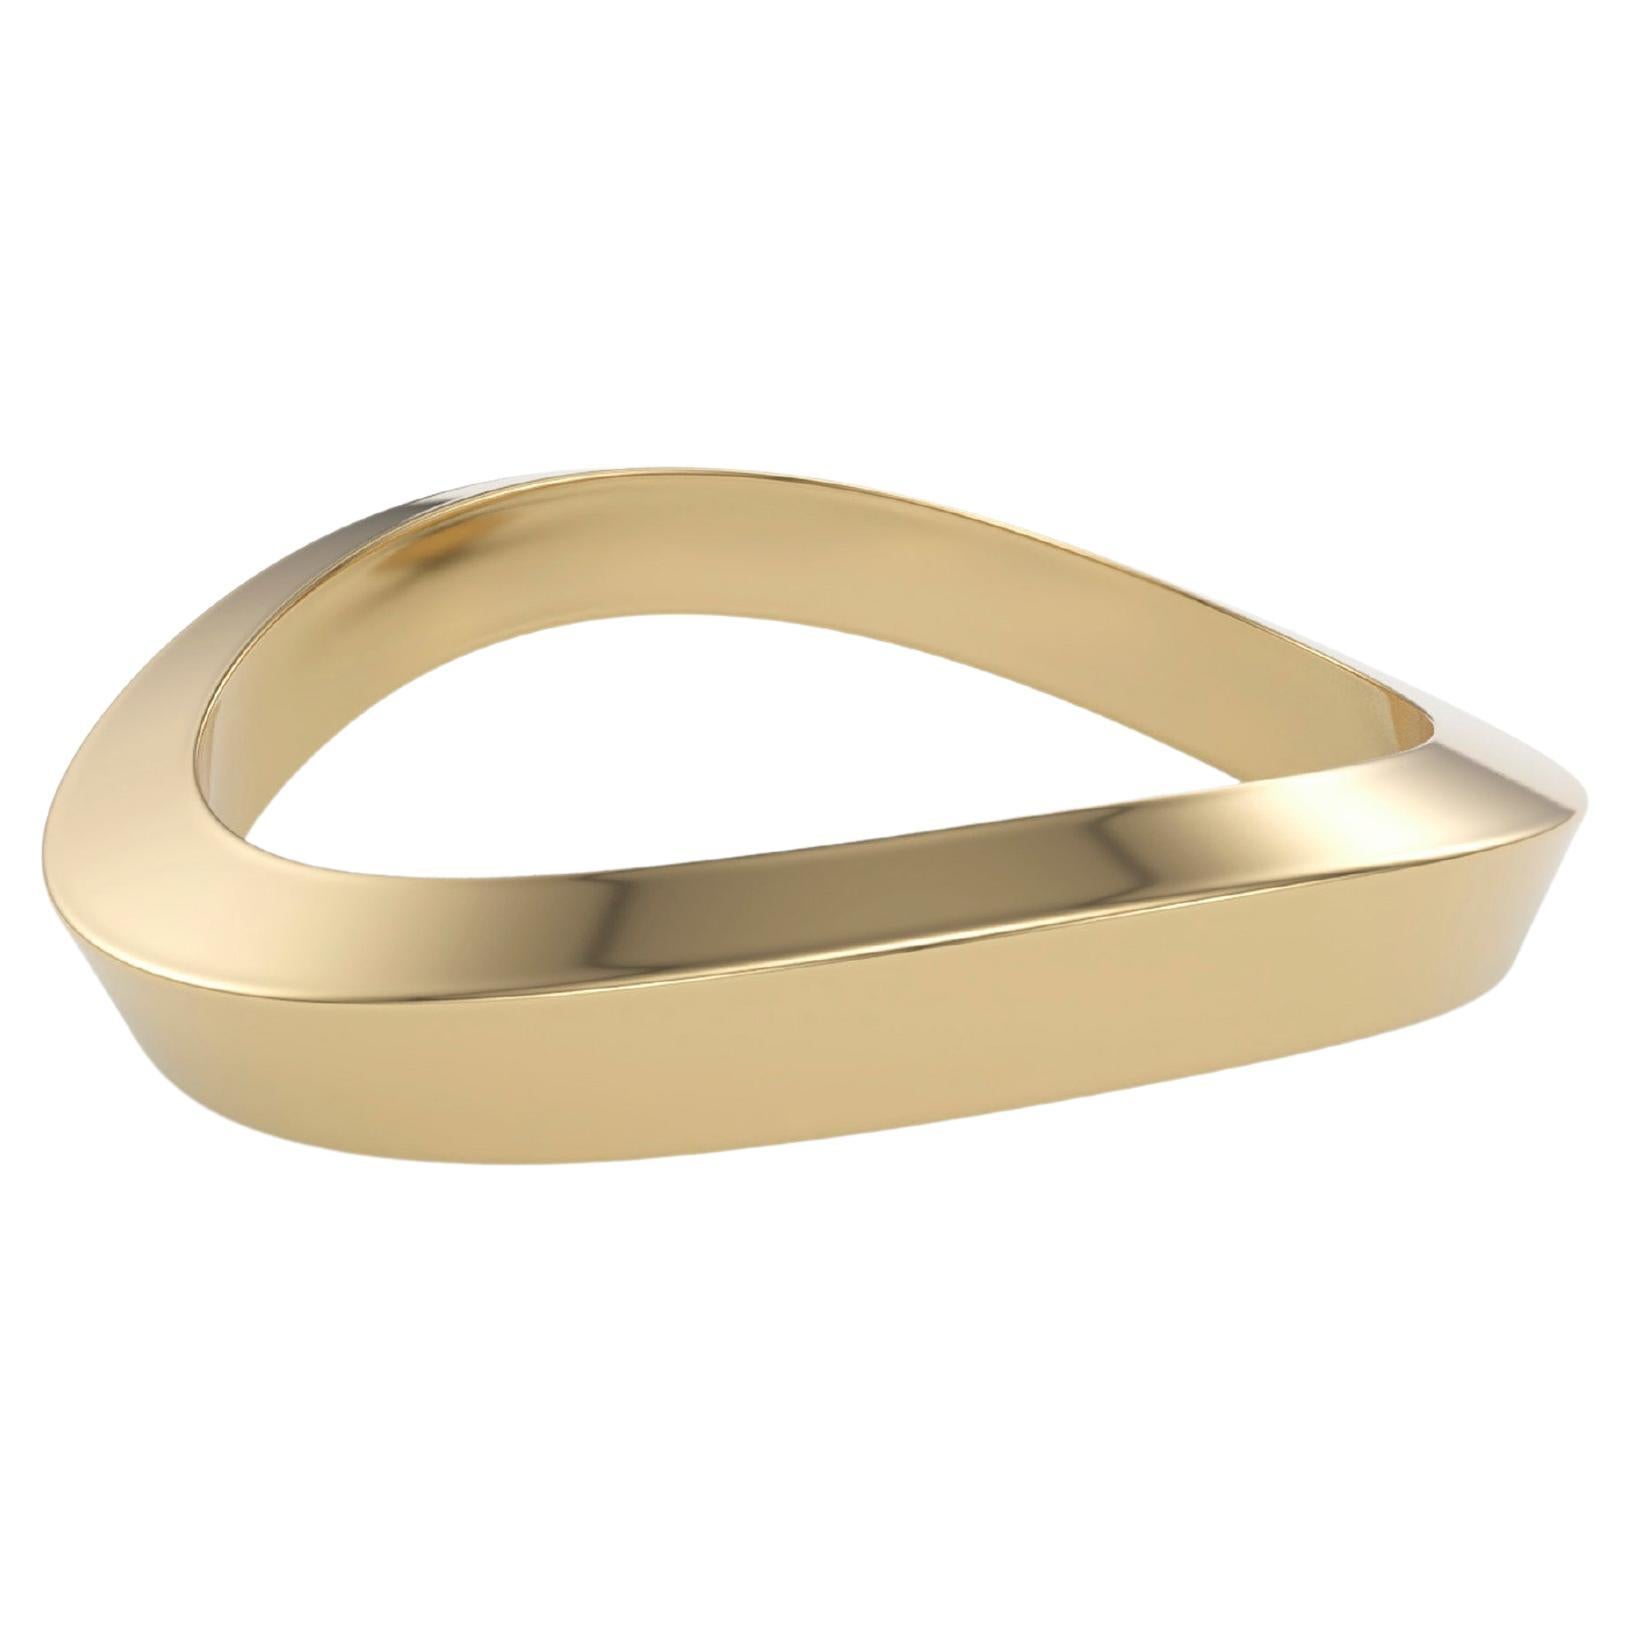 Casey Perez 18K Gold Band Stackable Ring-sz 6